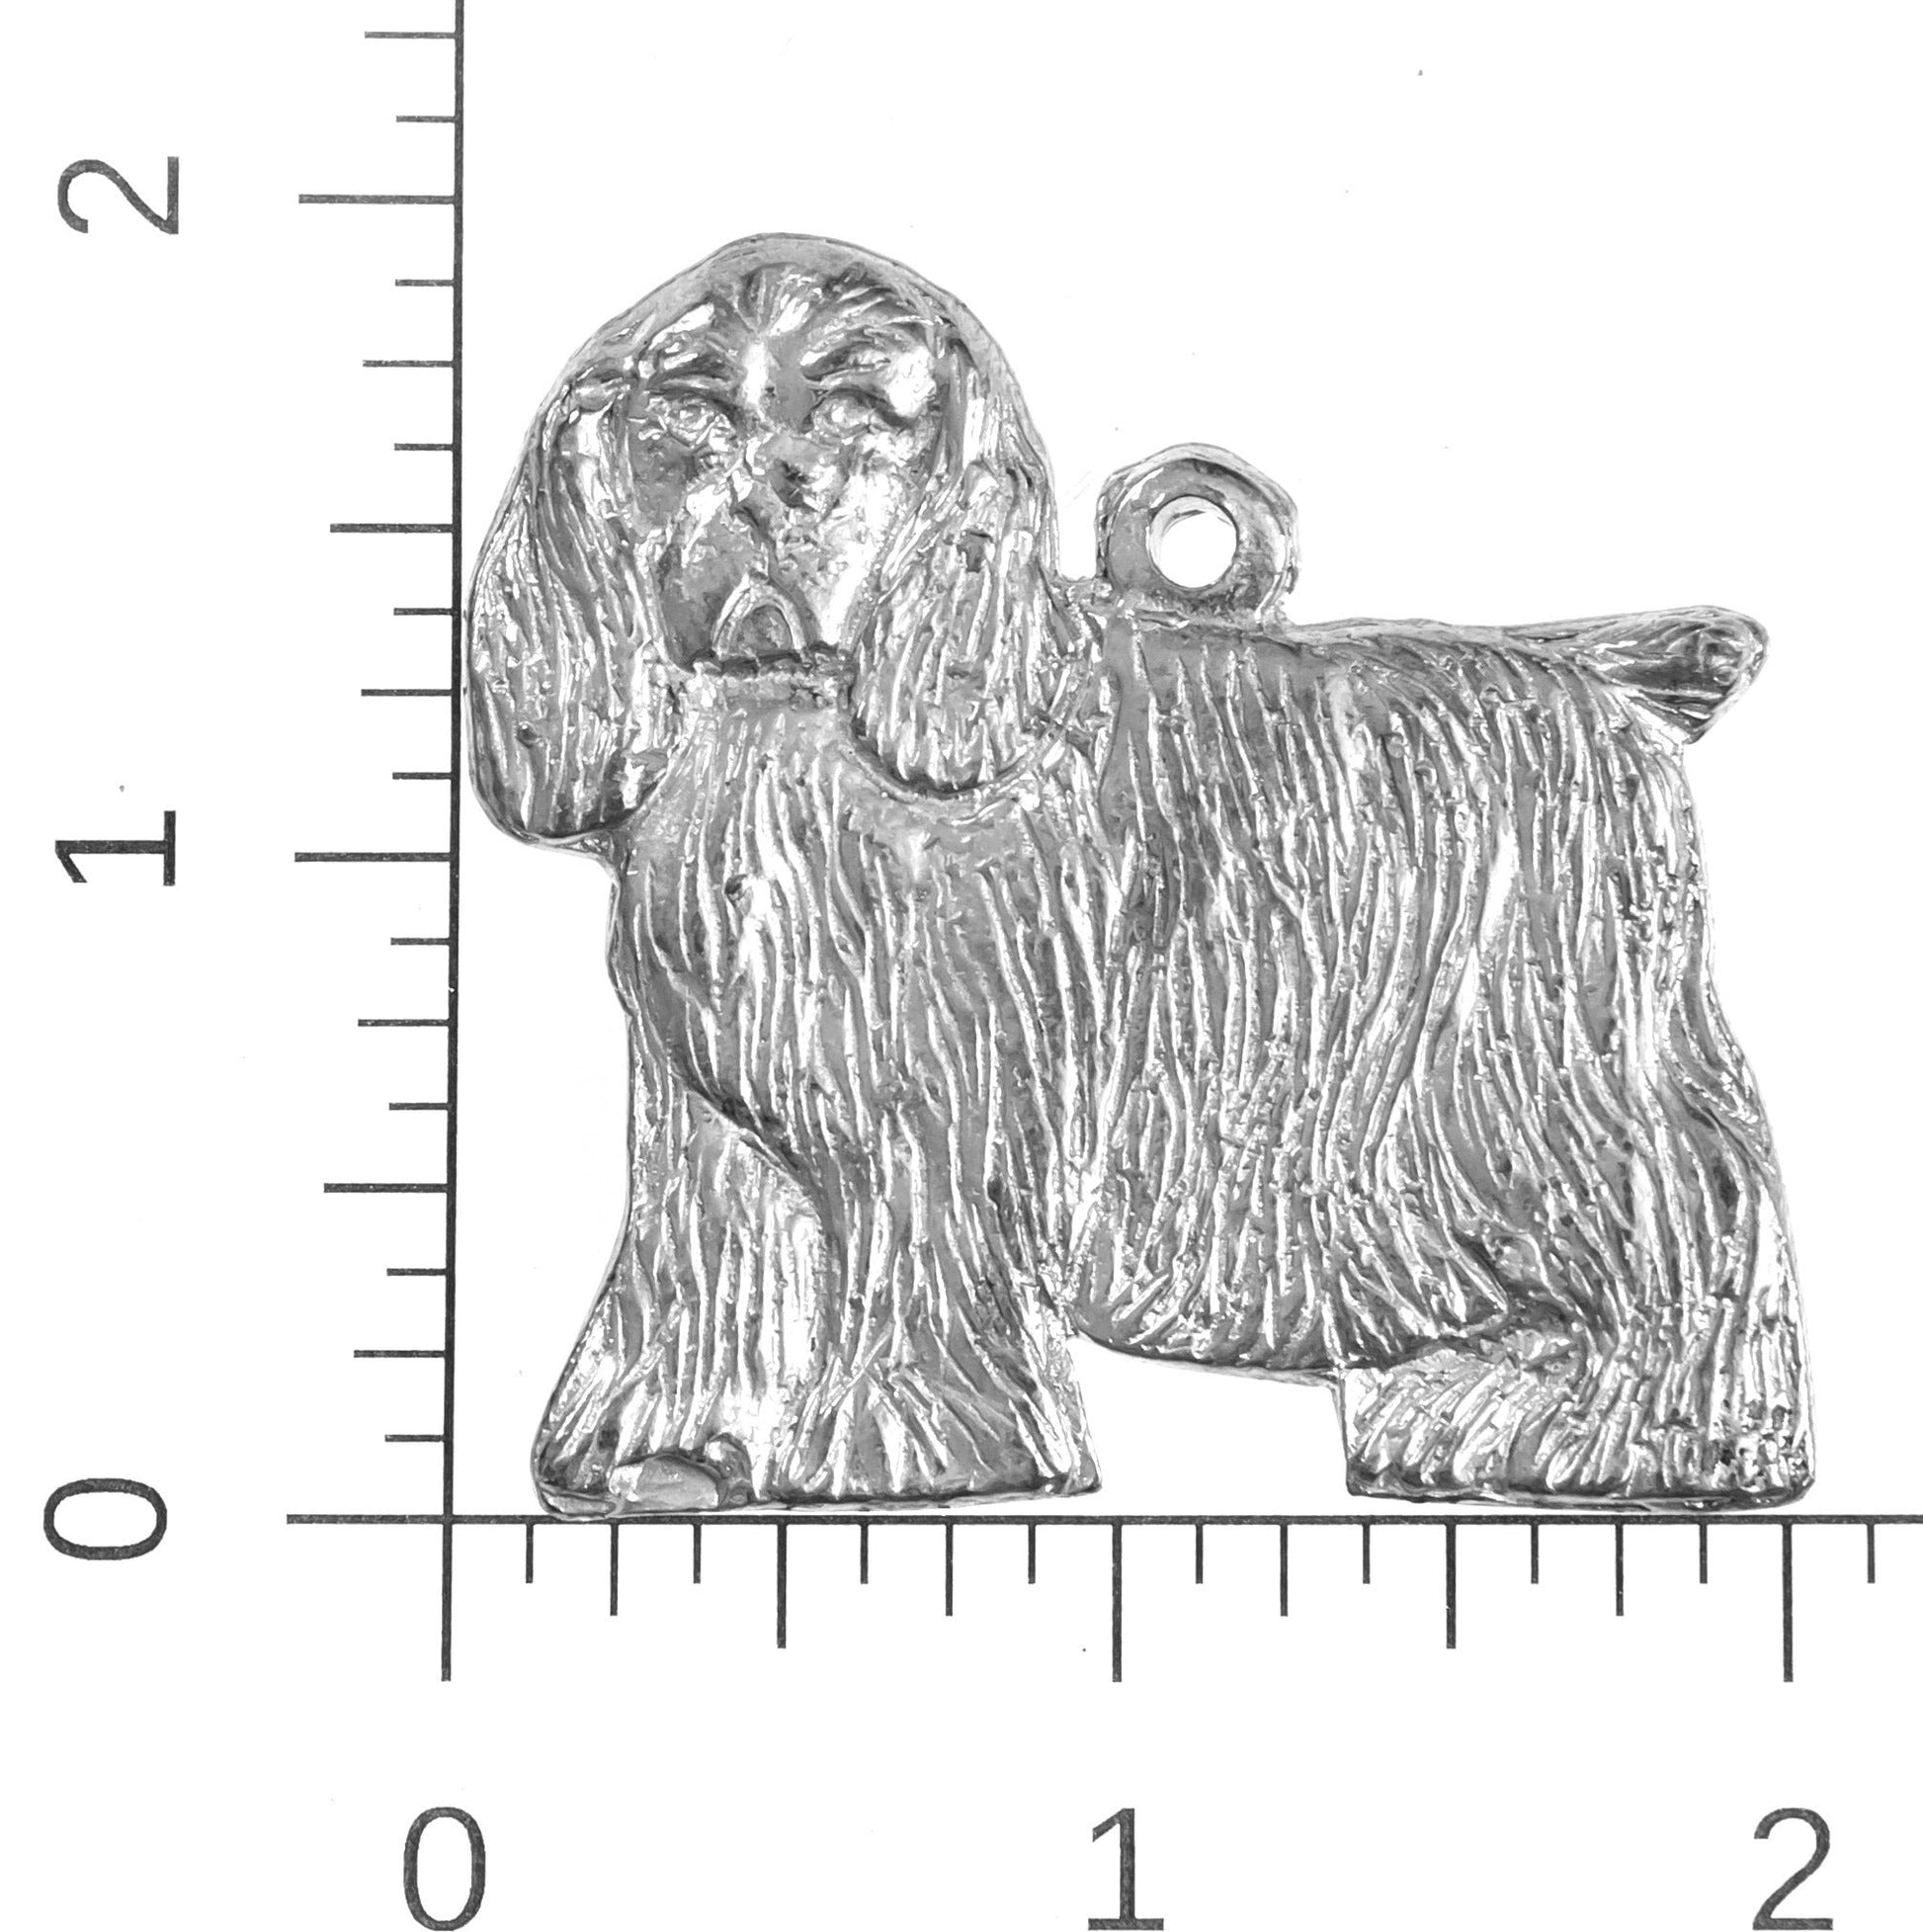 Silver Pewter Metal Cocker Spaniel Ornament Top Gift Ideas - House of Morgan Pewter